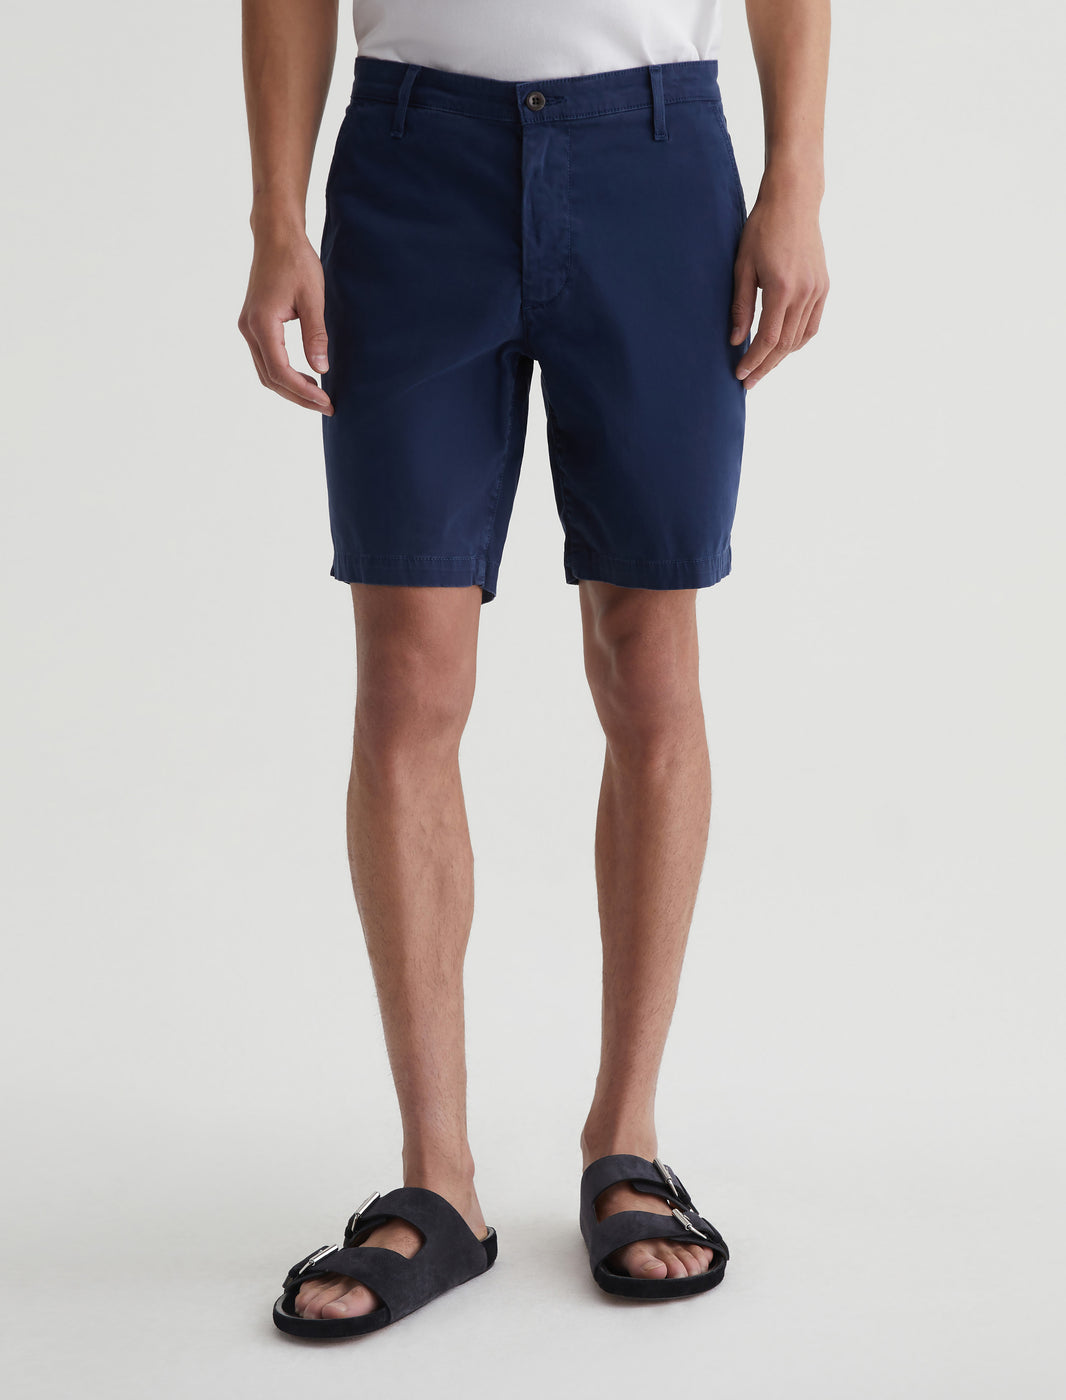 Mens Wanderer Short Dry Dust at AG Jeans Official Store